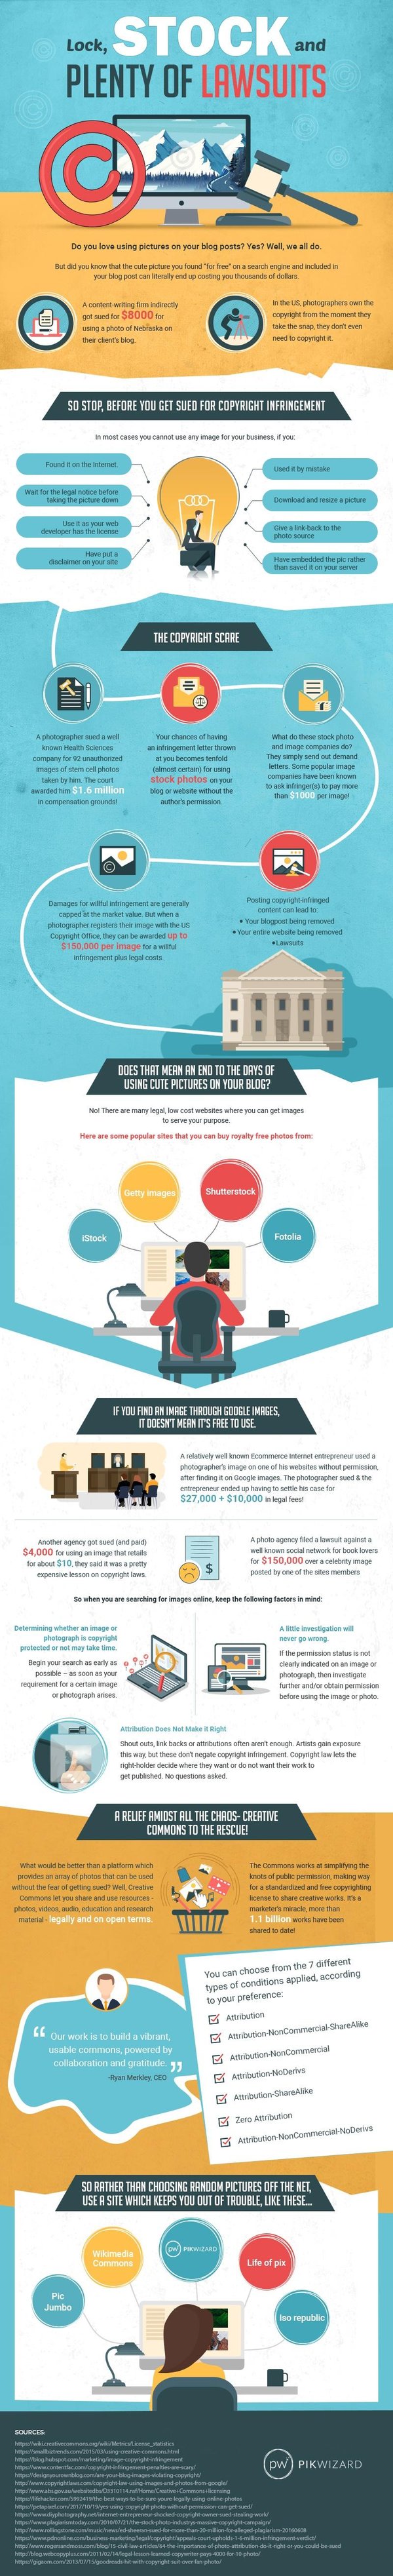 Copyright Law and Online Images Infographic